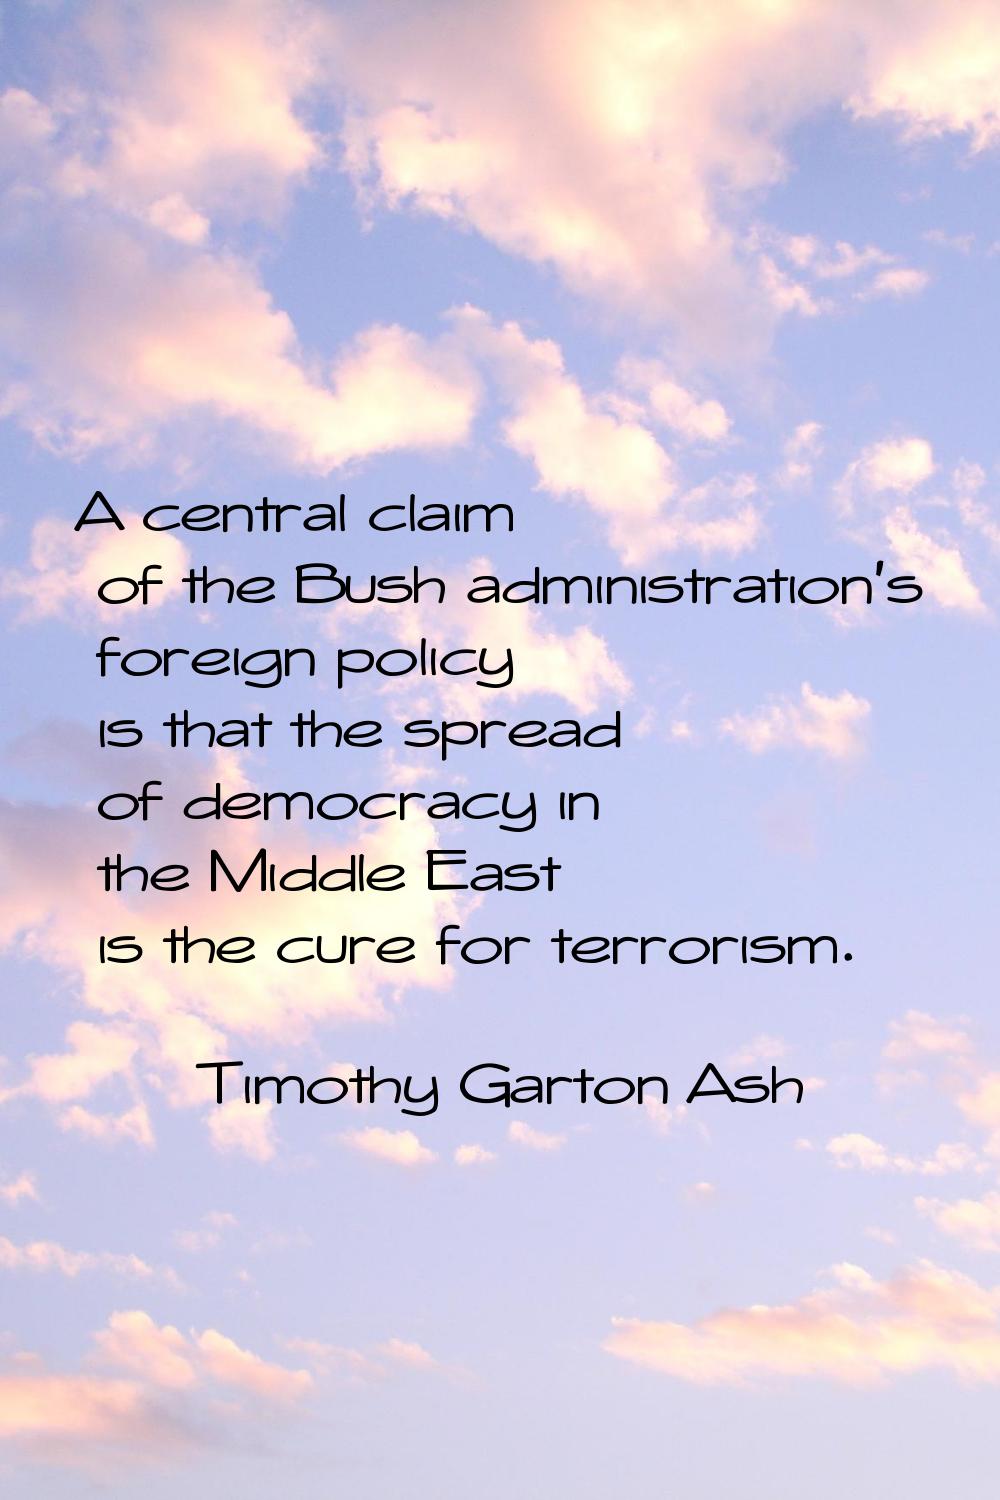 A central claim of the Bush administration's foreign policy is that the spread of democracy in the 